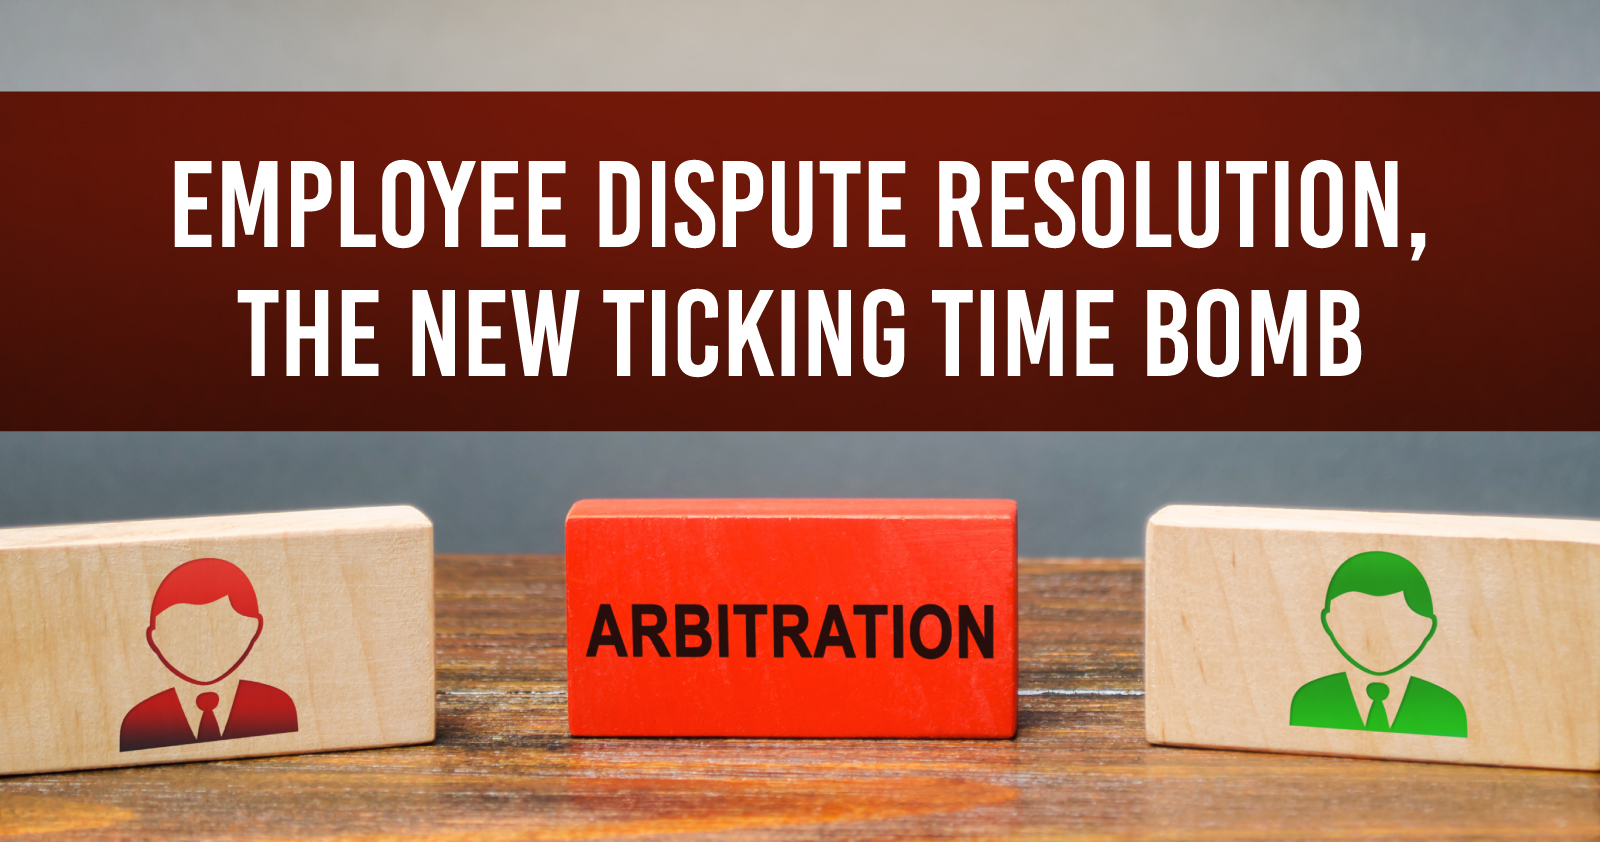 Employee Dispute Resolution The New Ticking Time Bomb